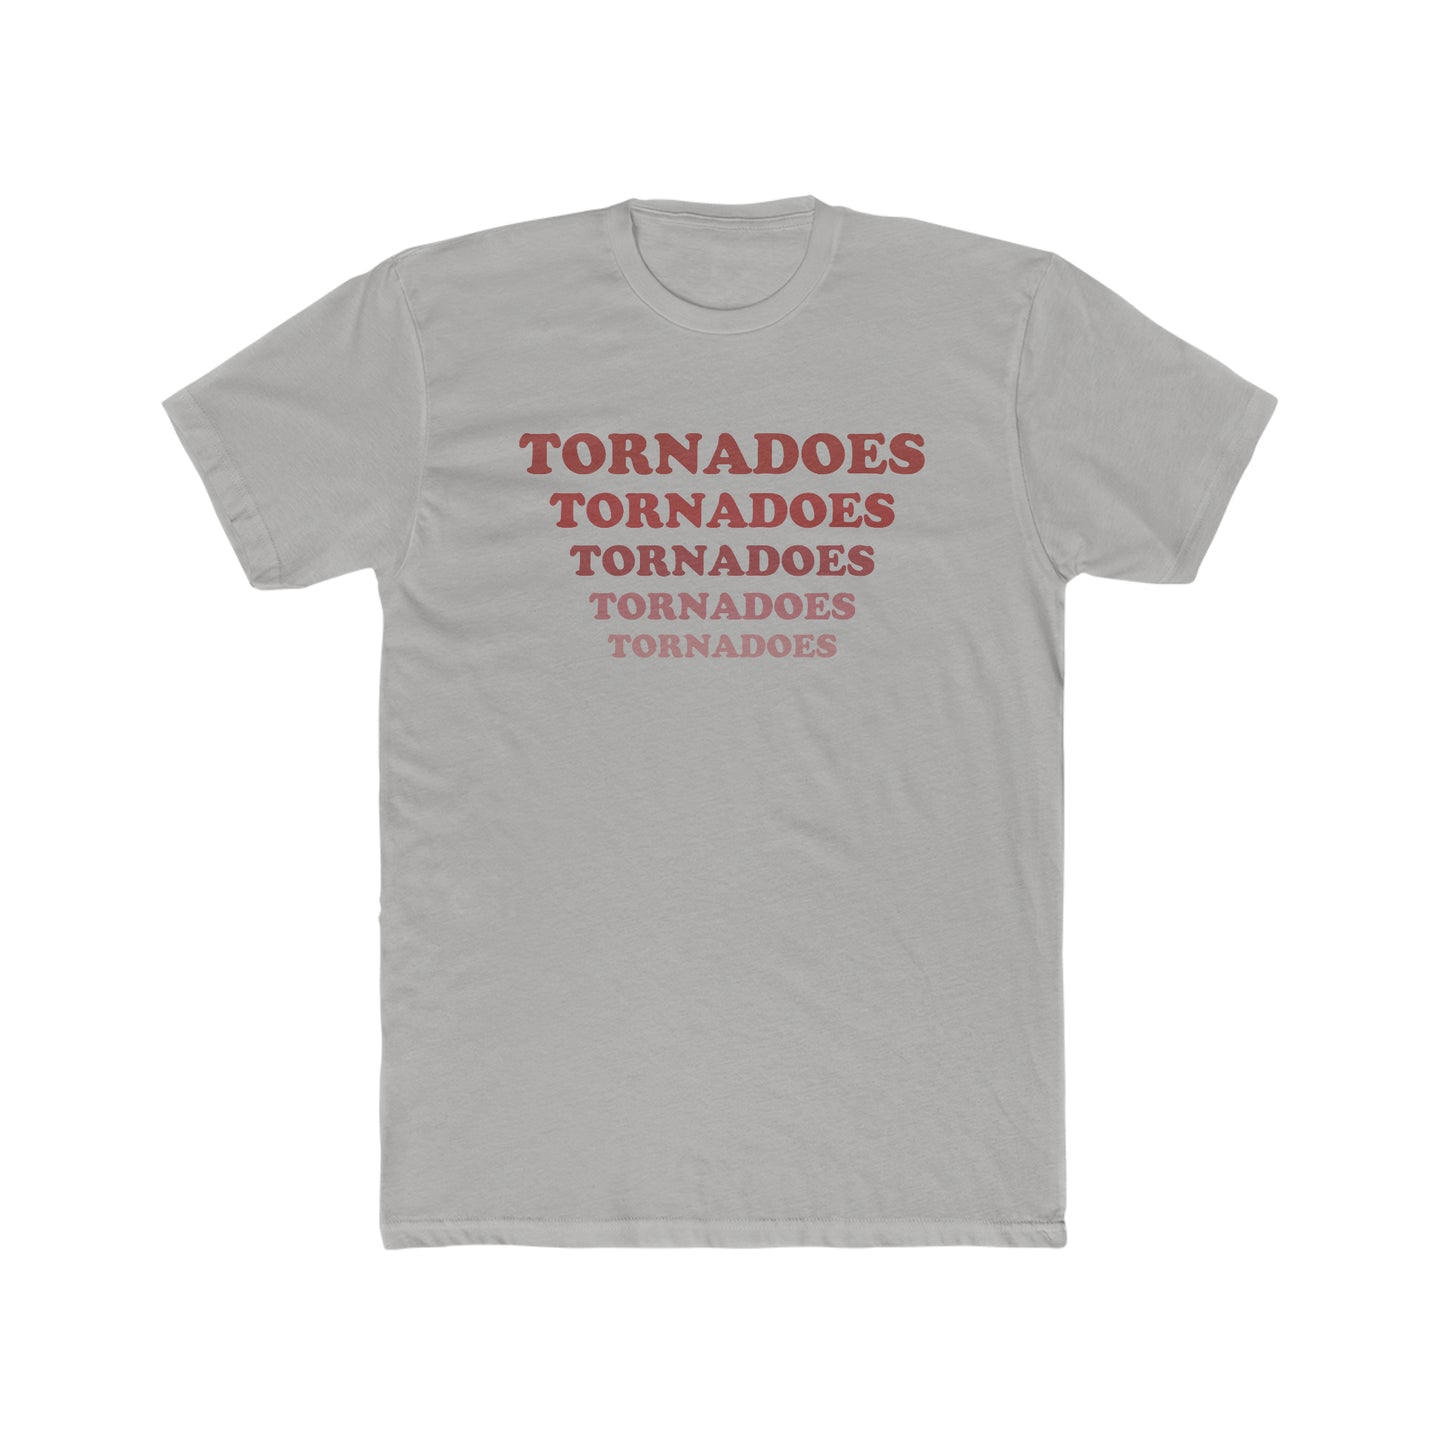 Tornadoes Tornadoes Tee - Never Stop Chasing